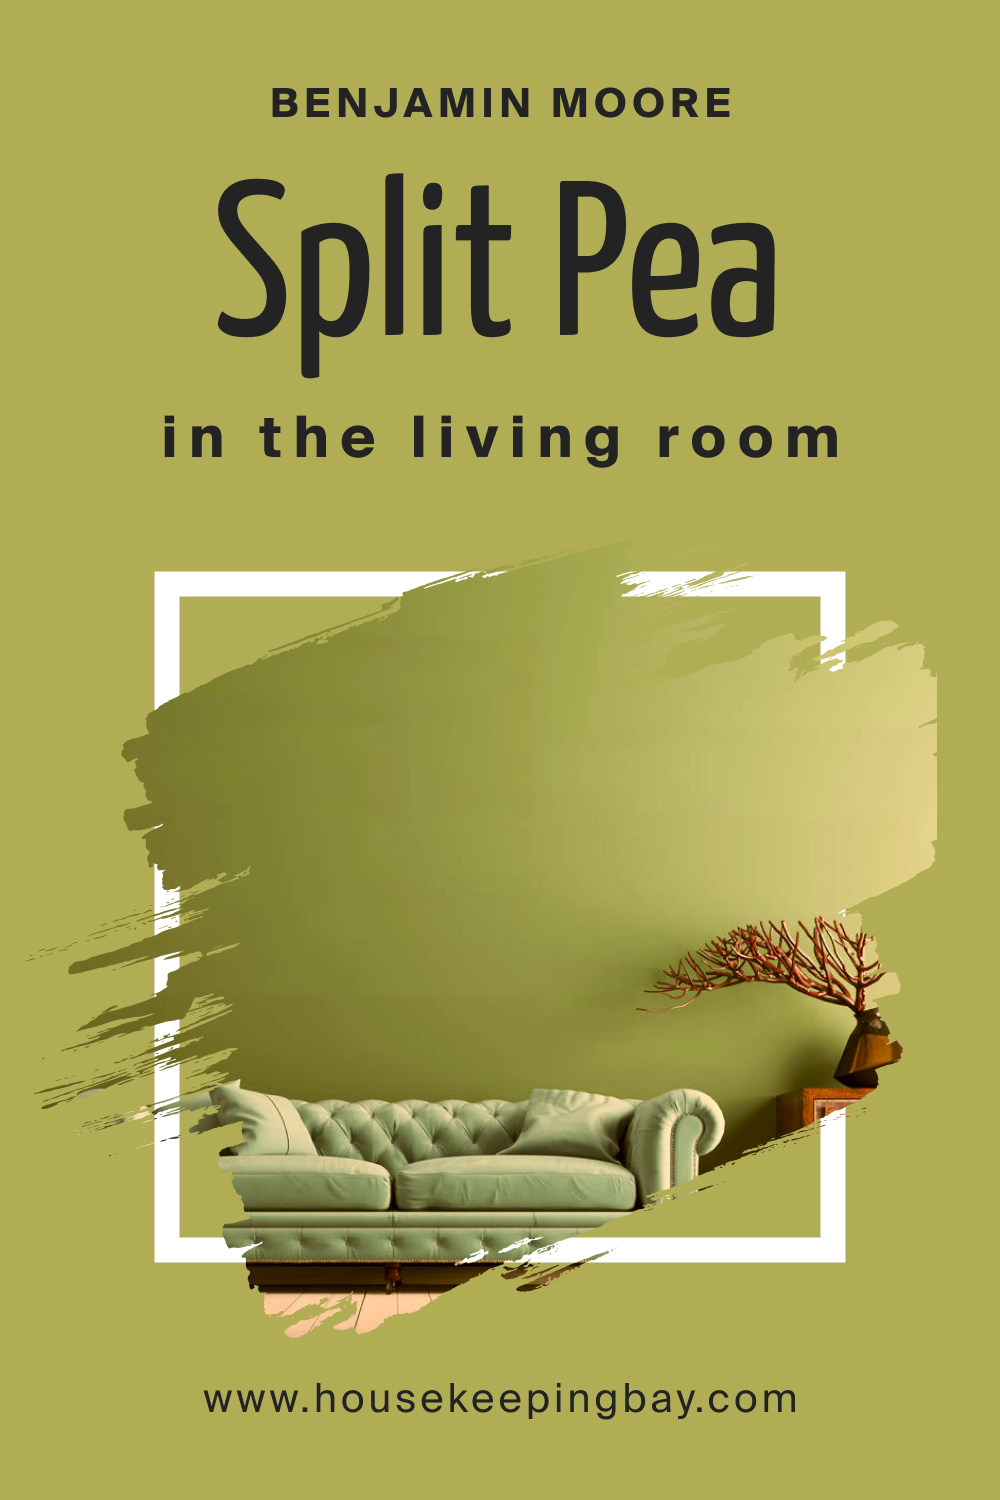 How to Use Split Pea 2146-30 in the Living Room?